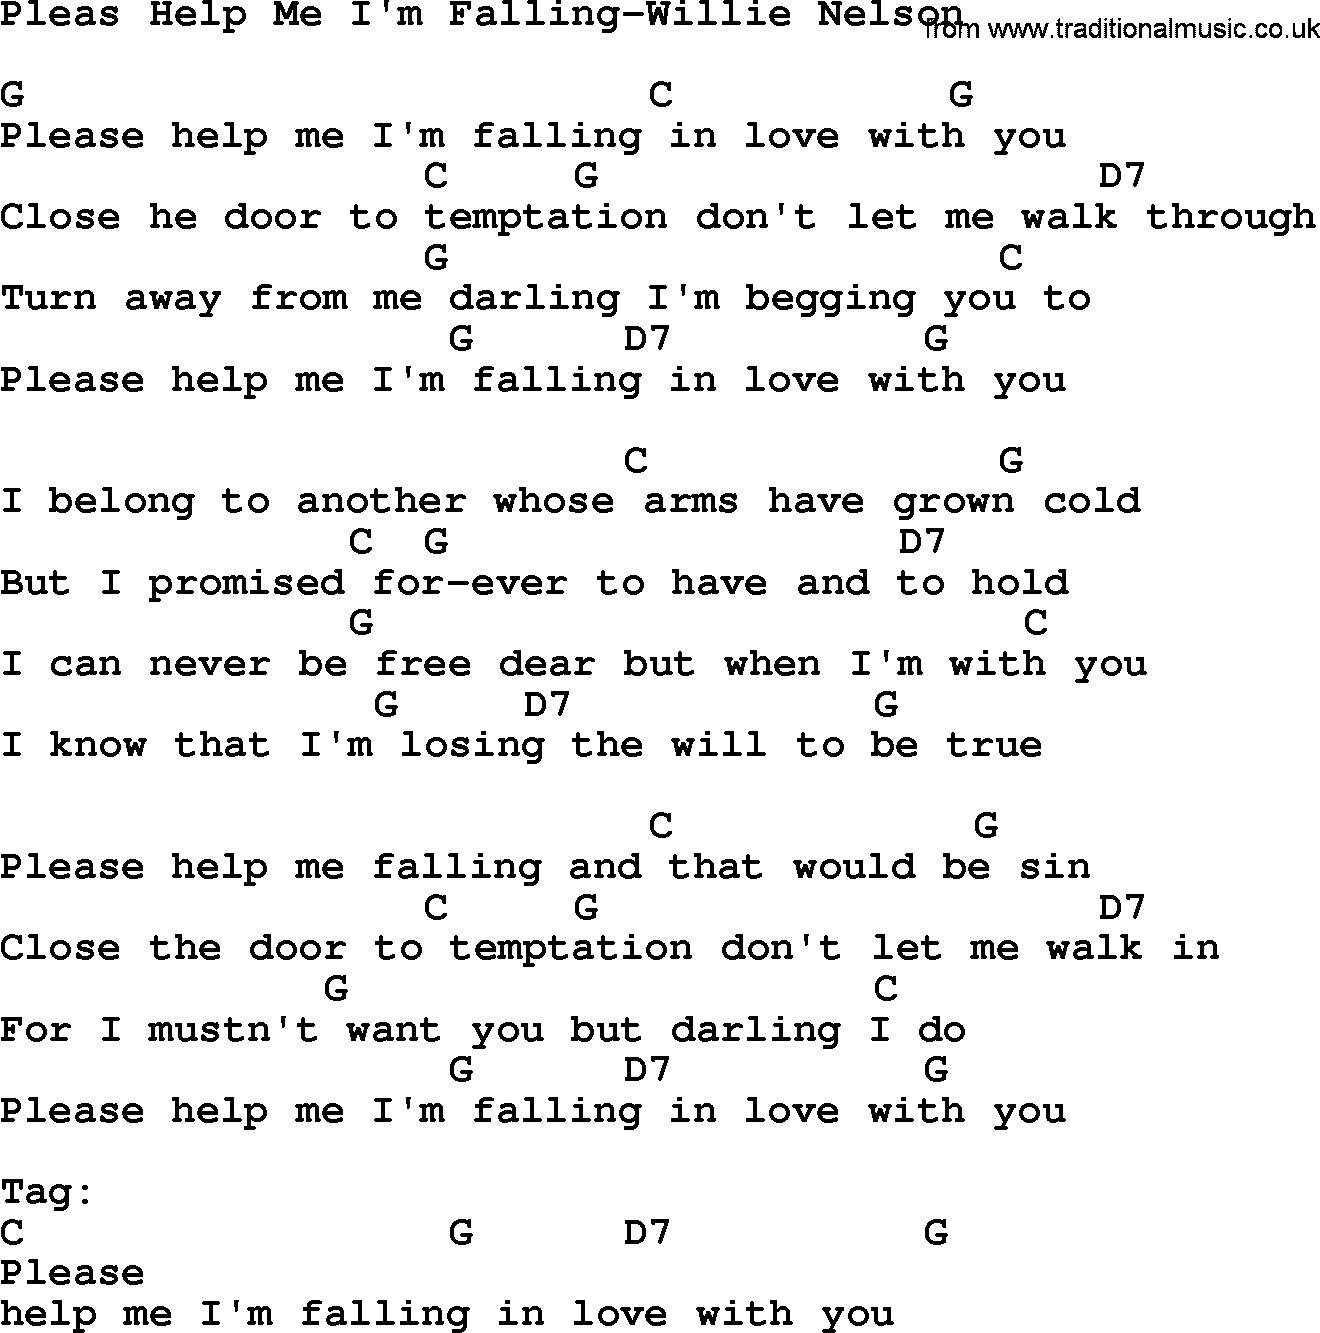 Country music song: Pleas Help Me I'm Falling-Willie Nelson lyrics and chords